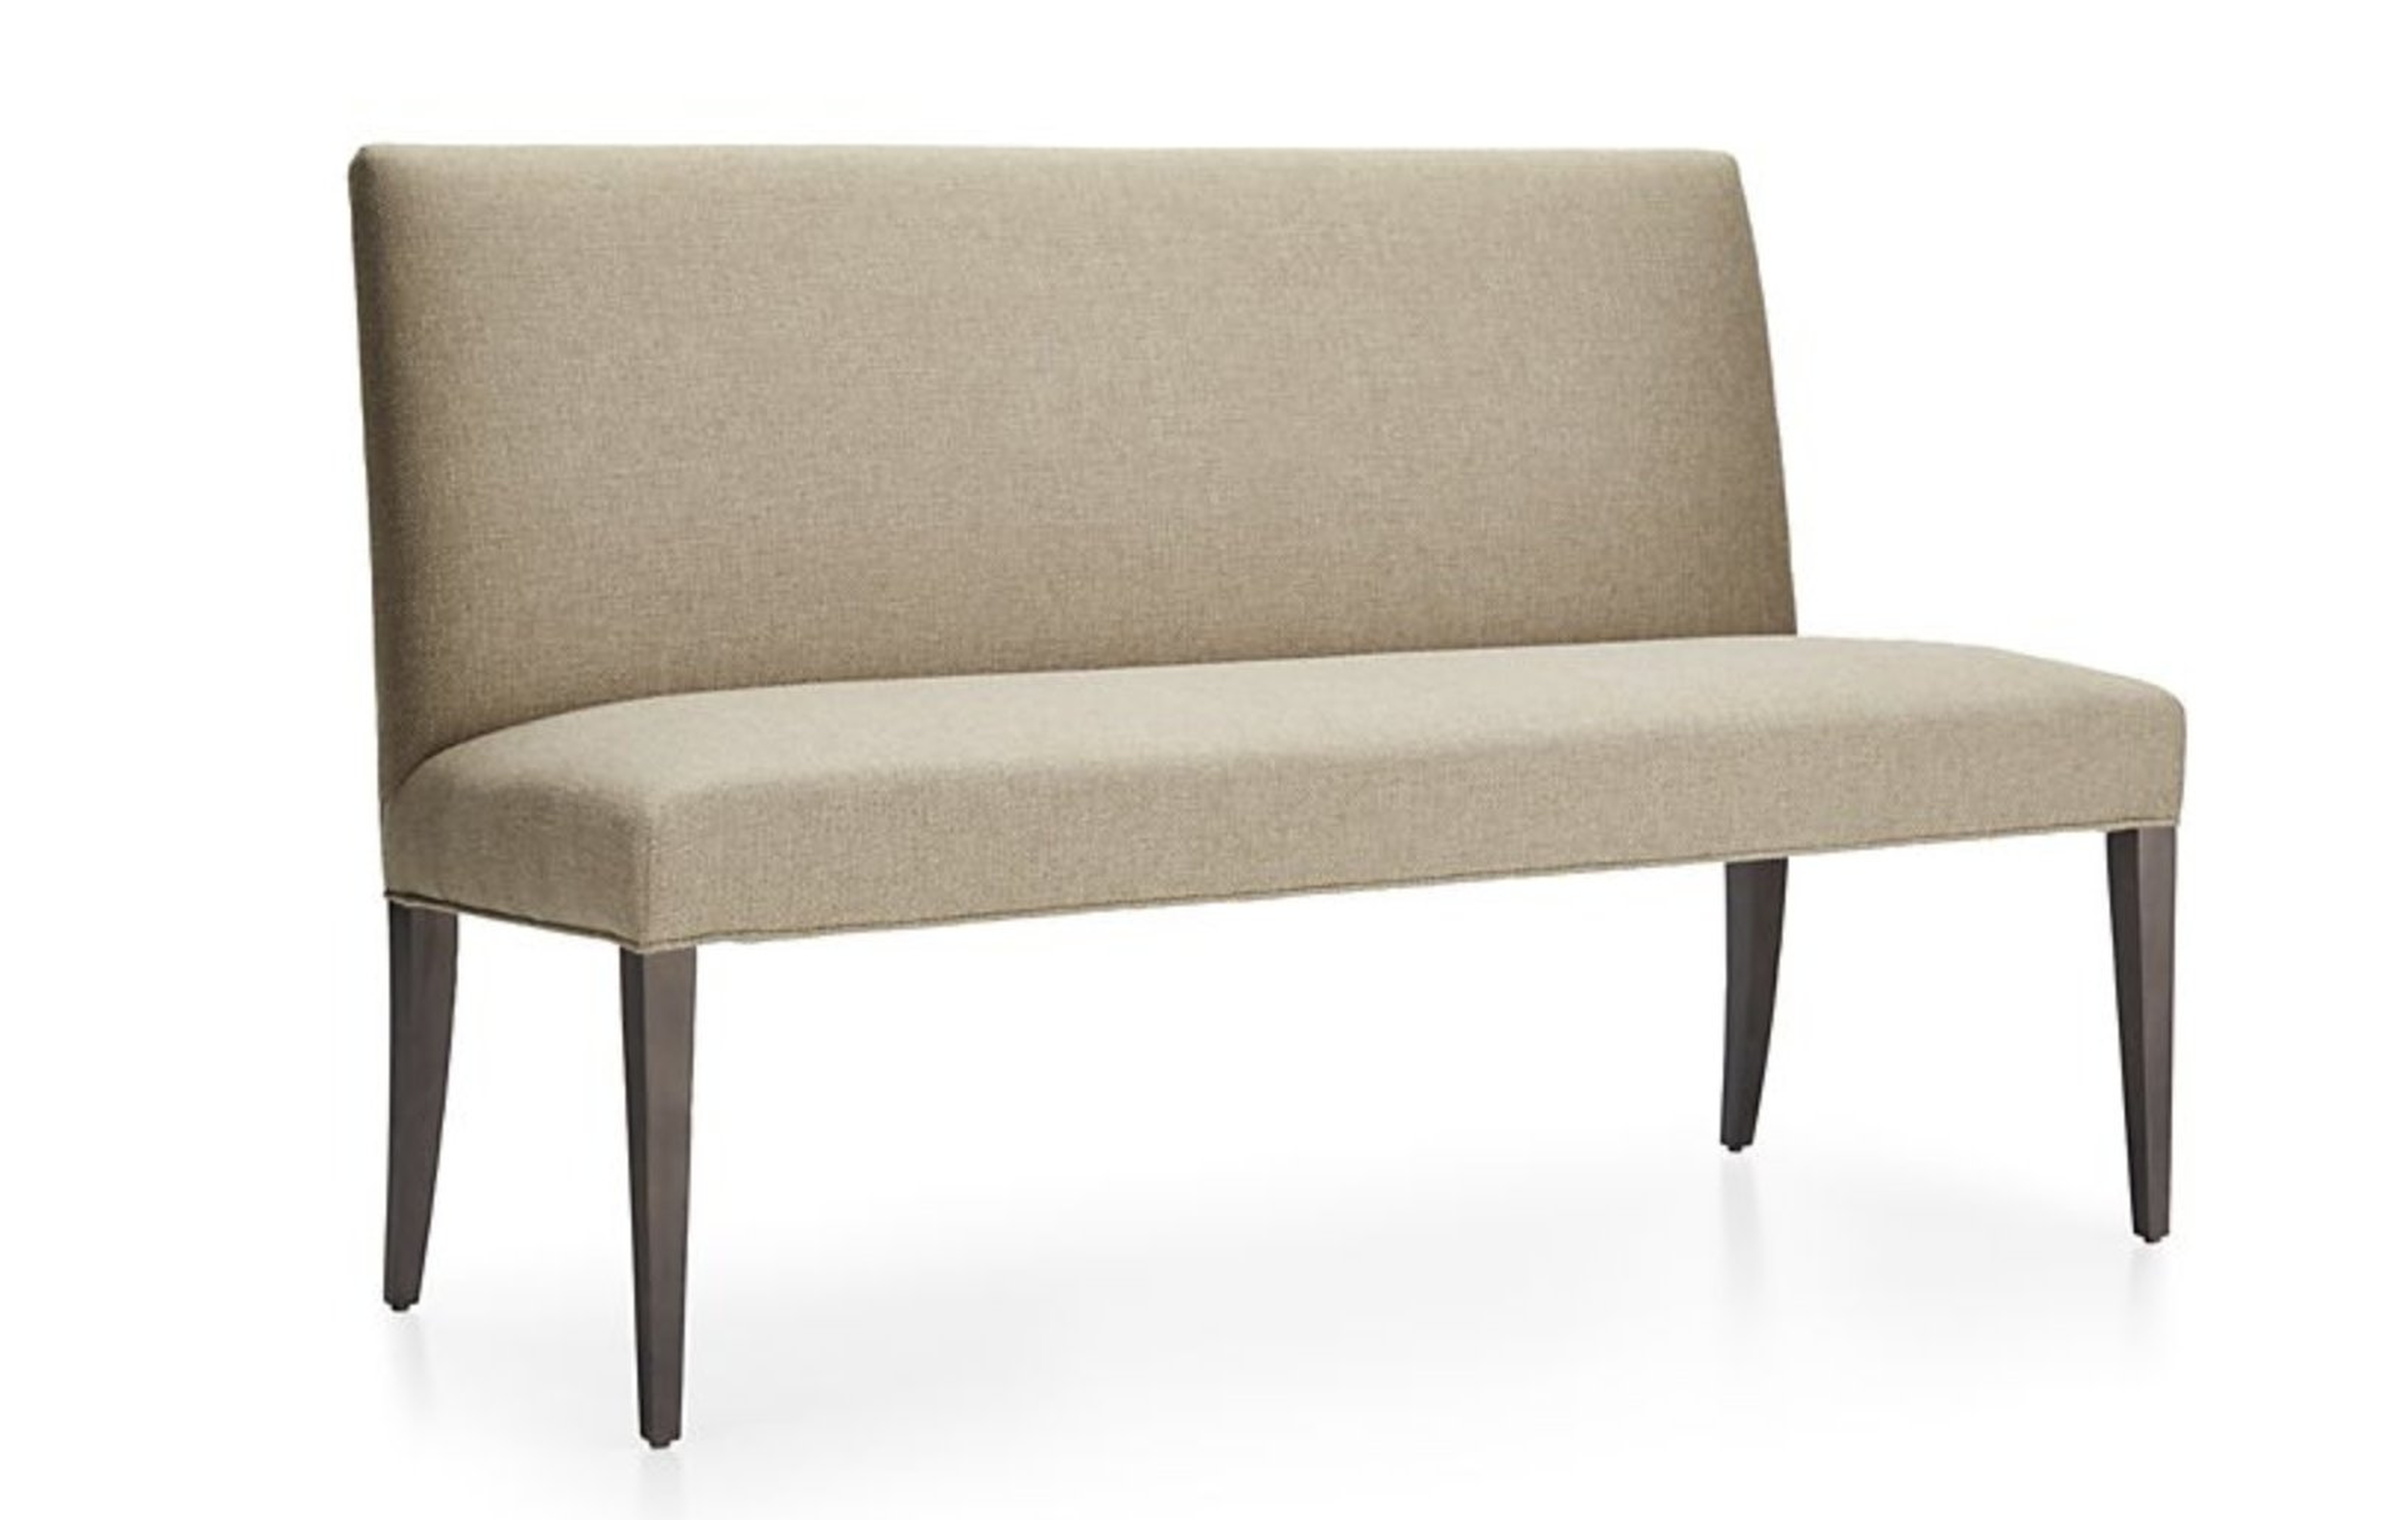 Miles 58" Medium Upholstered Dining Banquette Bench - Crate and Barrel